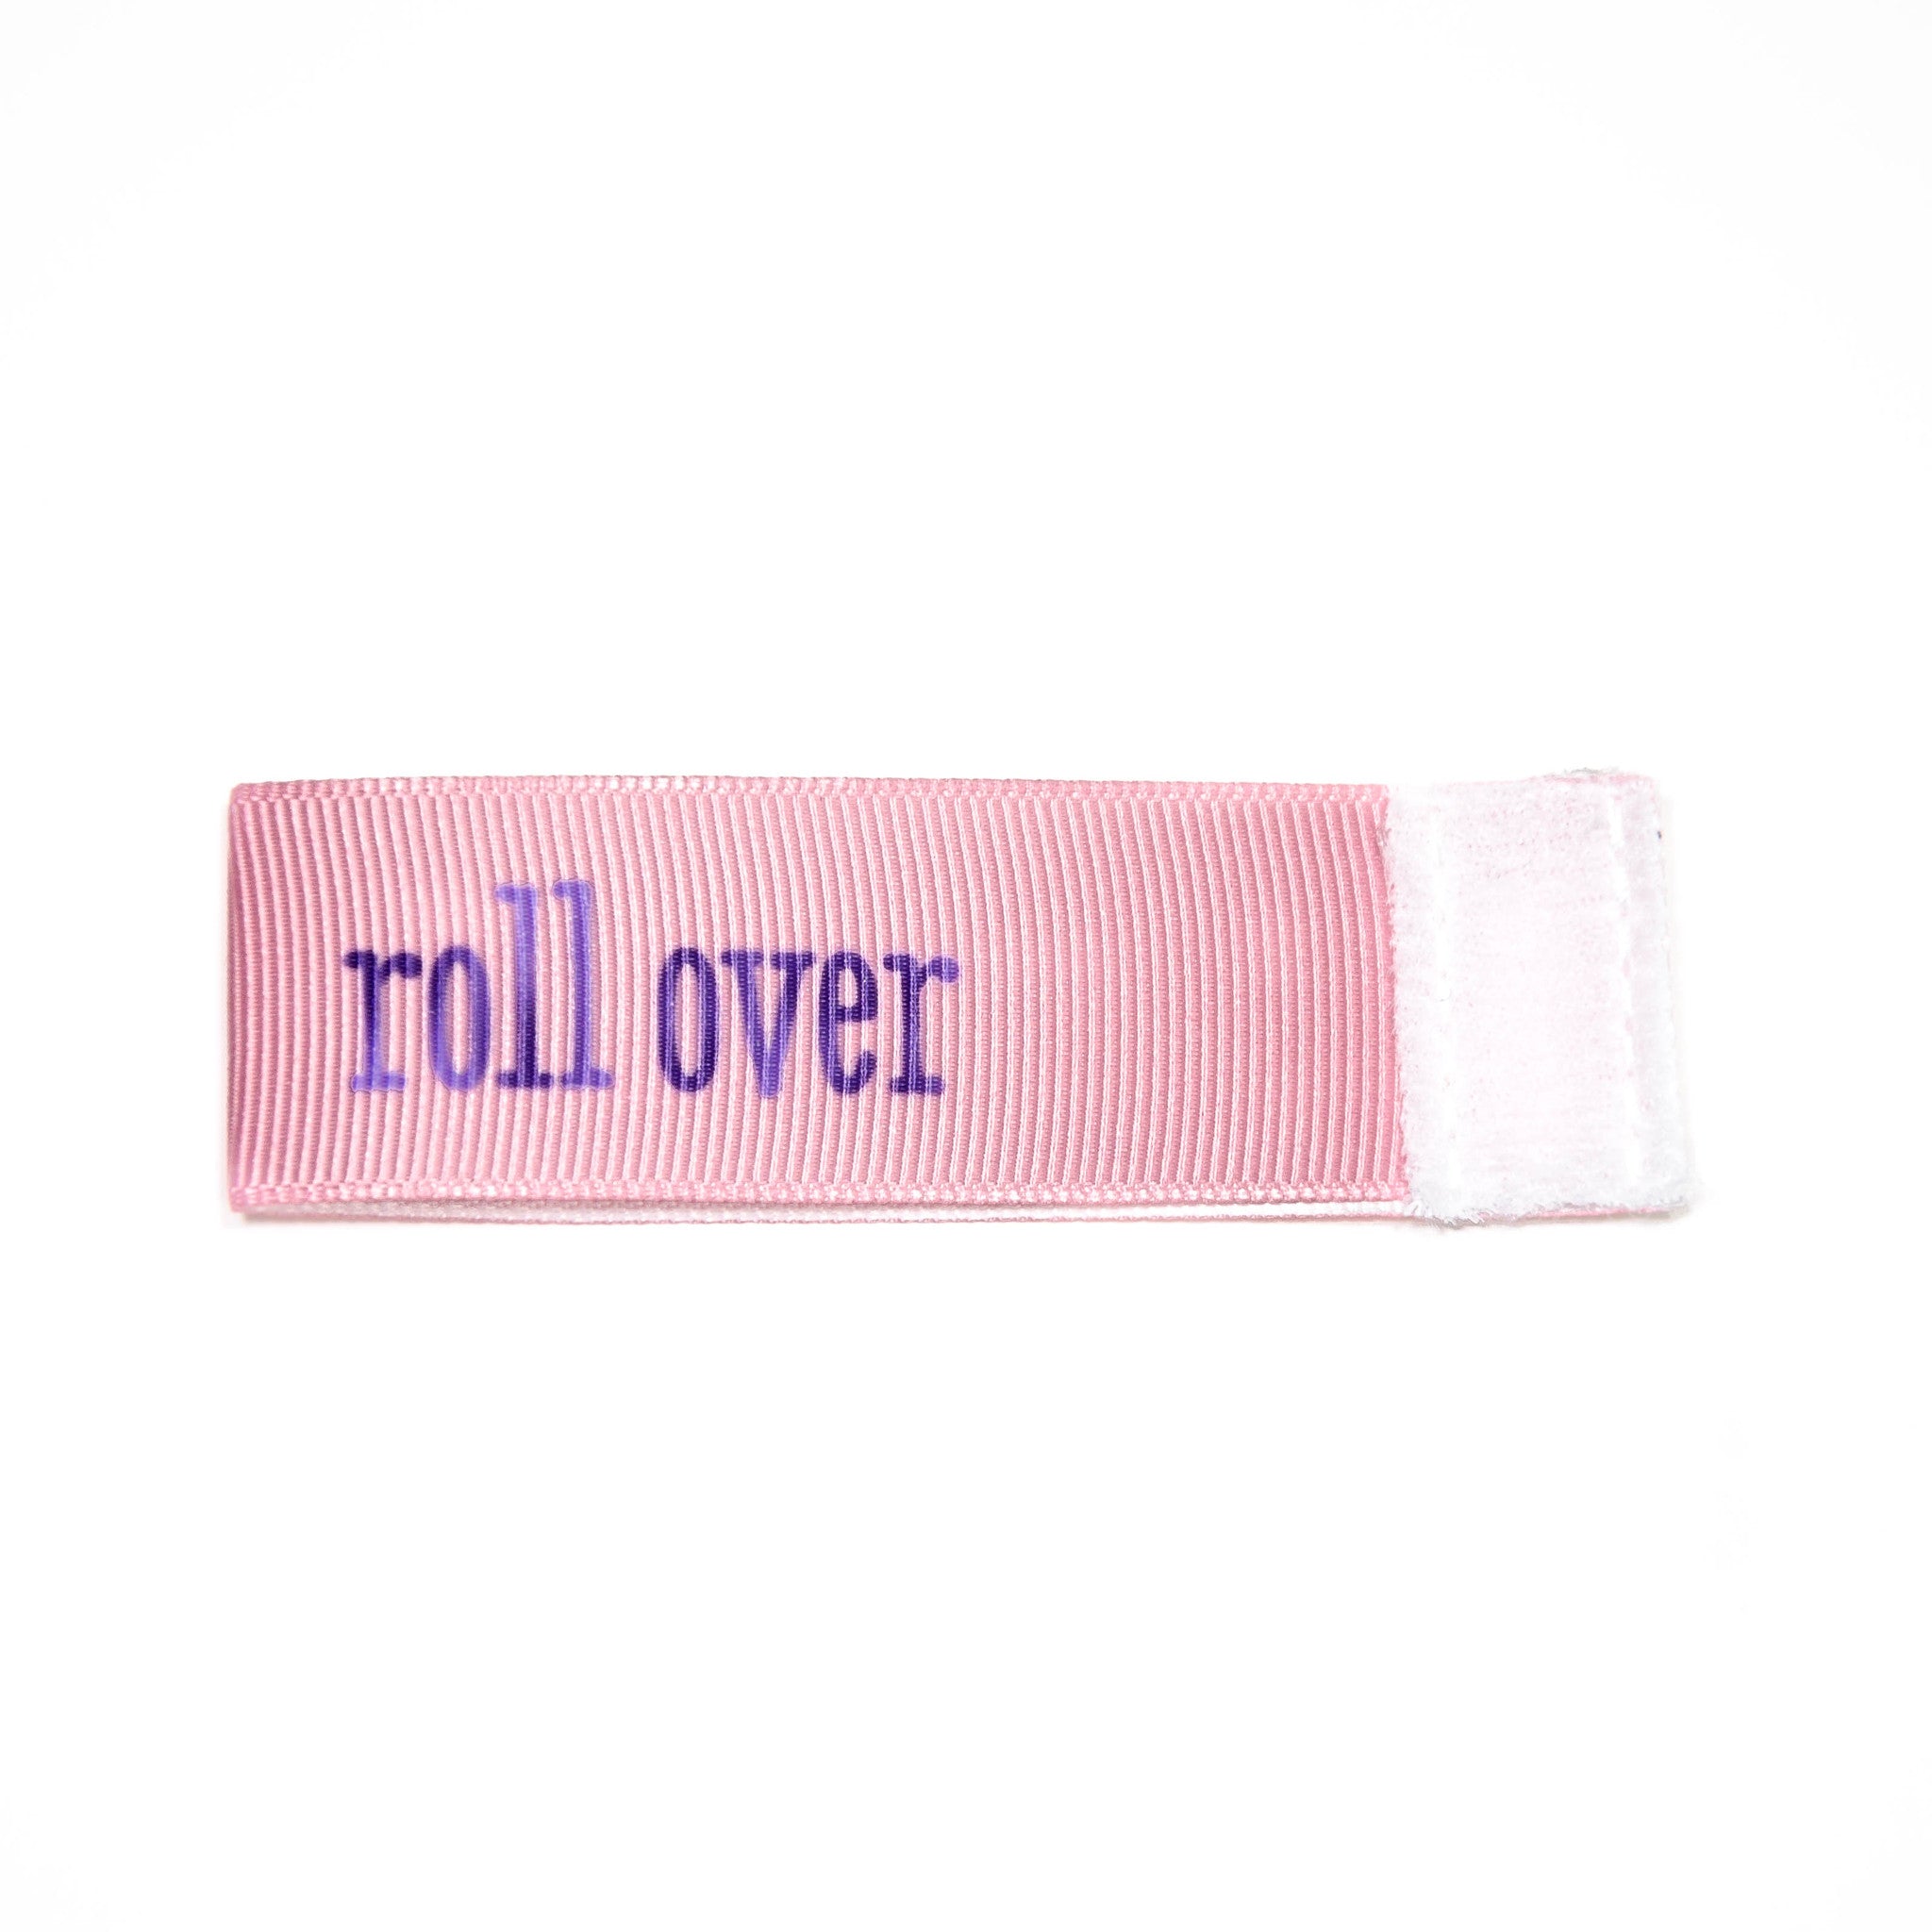 roll over Wee Charm ribbon pink